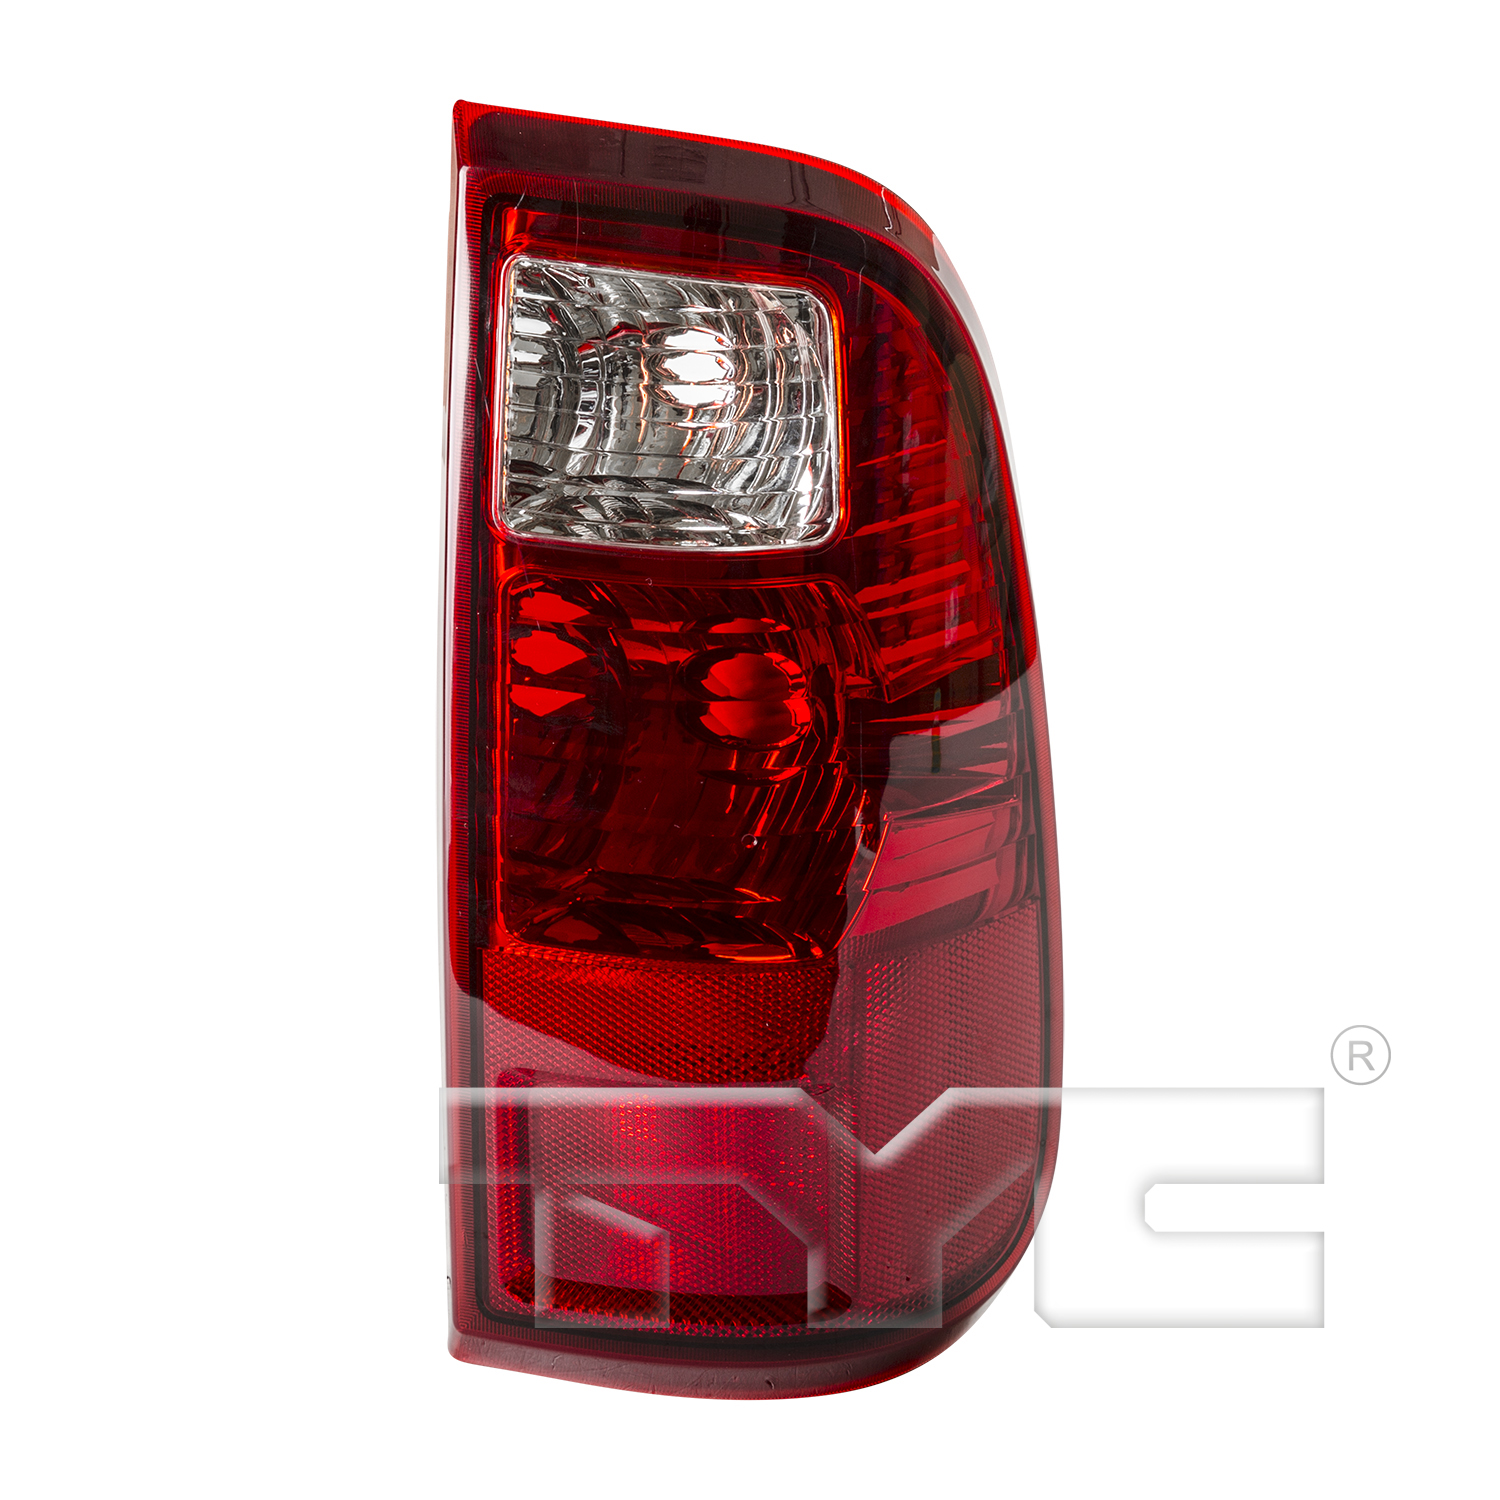 Aftermarket TAILLIGHTS for FORD - F-350 SUPER DUTY, F-350 SUPER DUTY,08-16,RT Taillamp assy